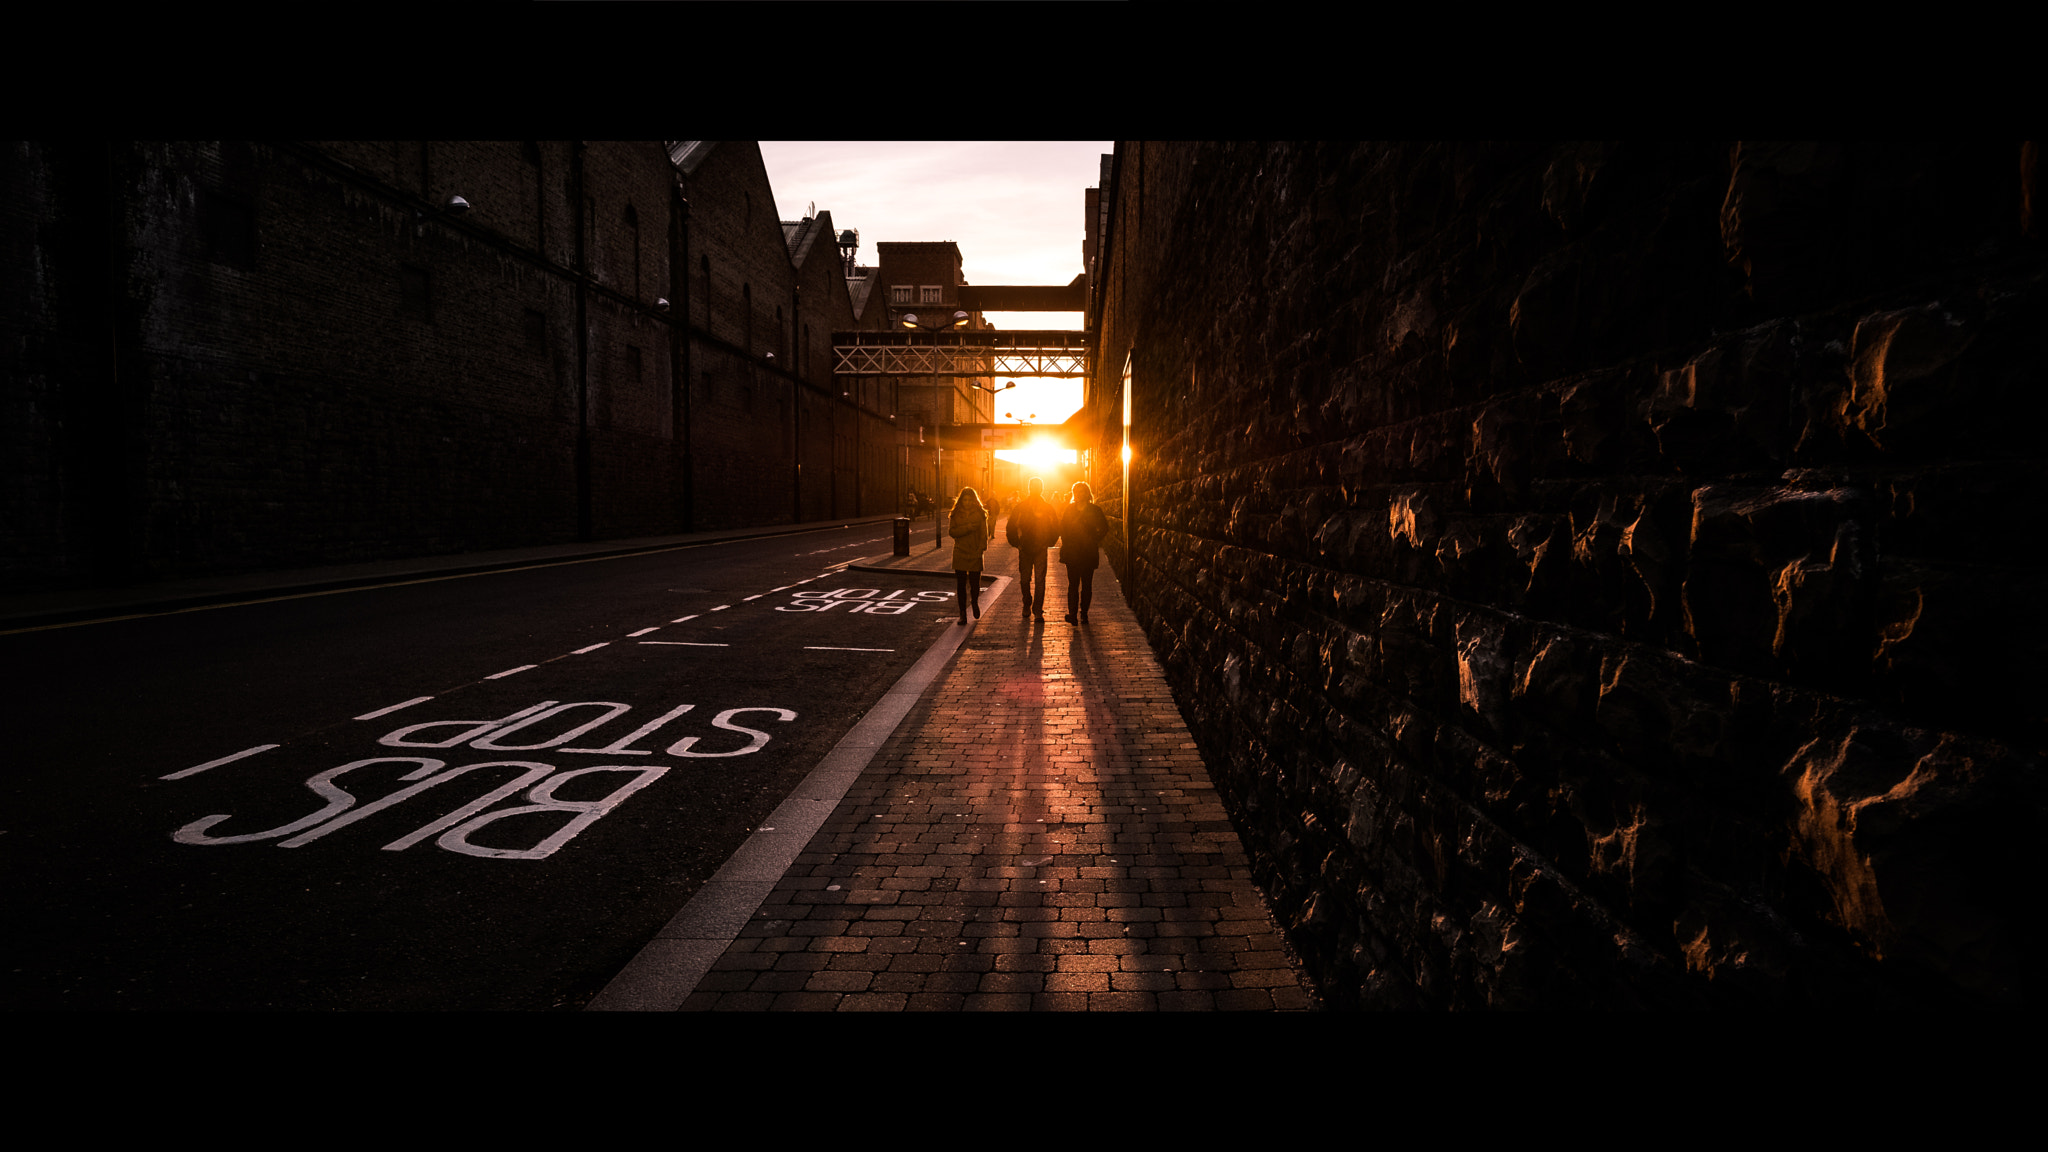 Fujifilm X-Pro2 sample photo. Sunset in bellevue - dublin, ireland - color street photography photography